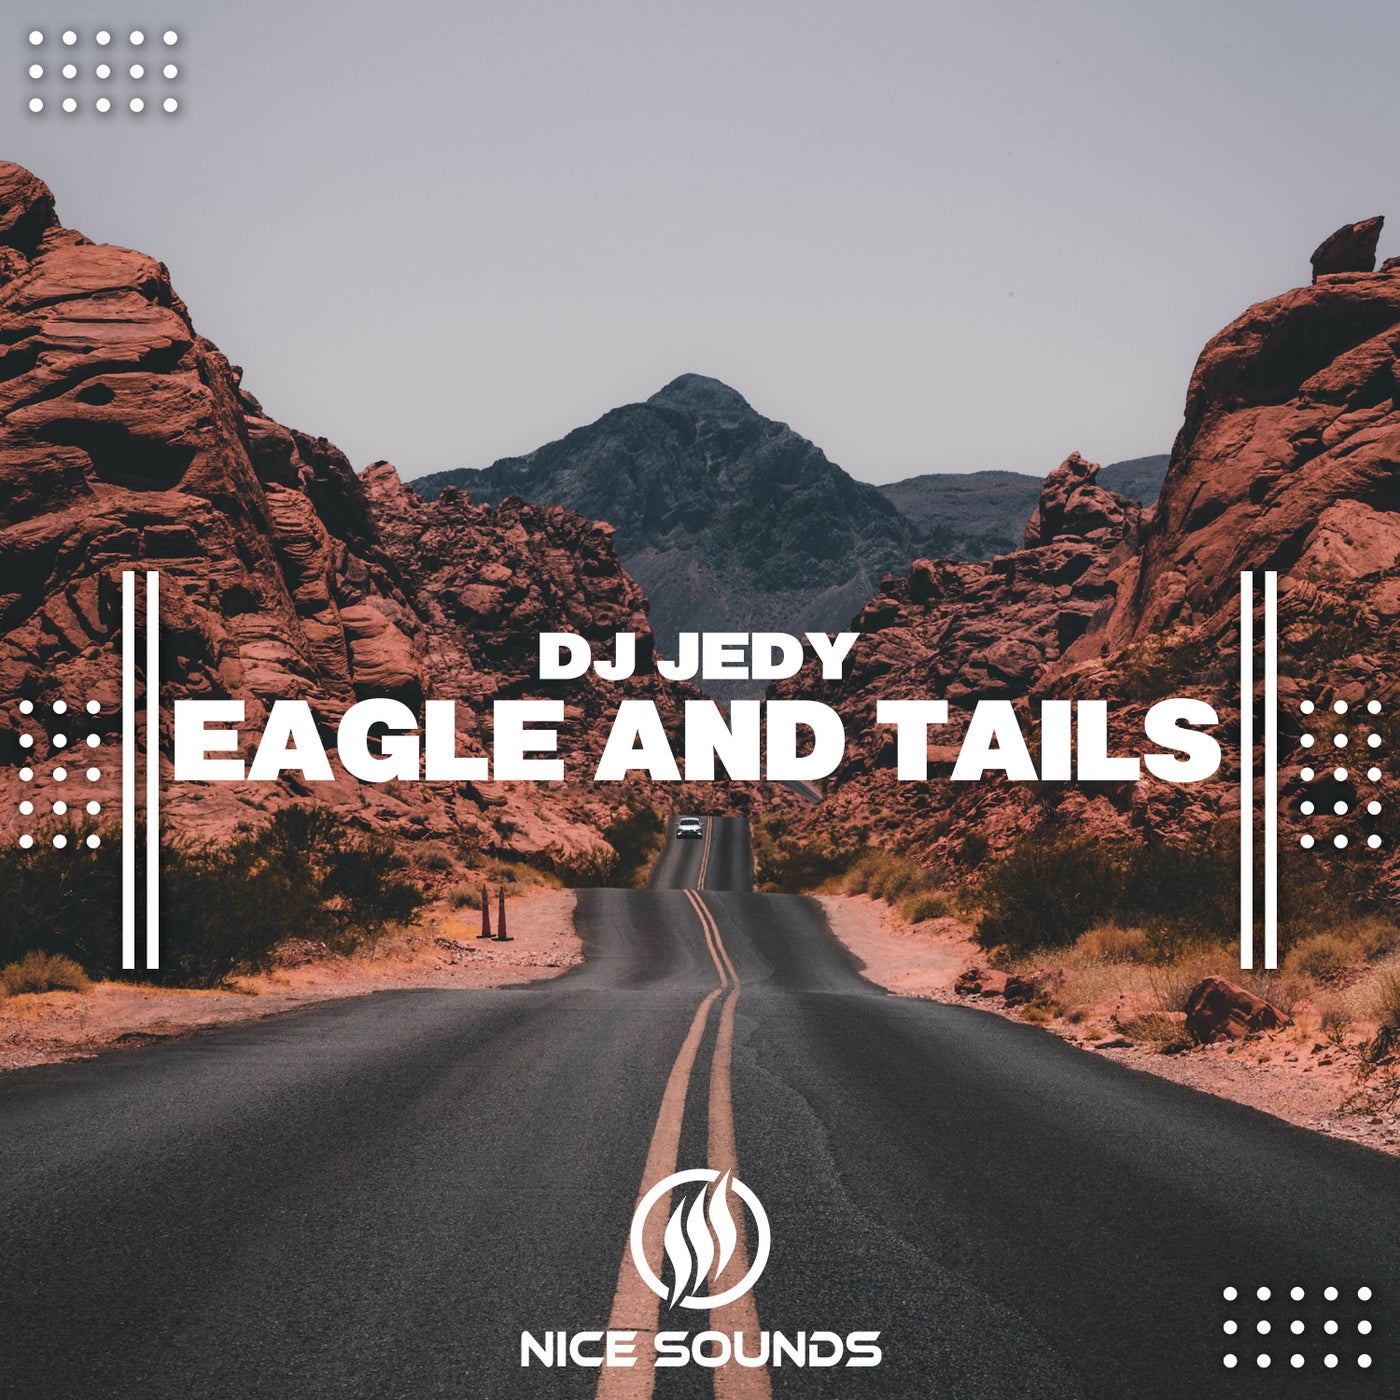 Eagle and tails